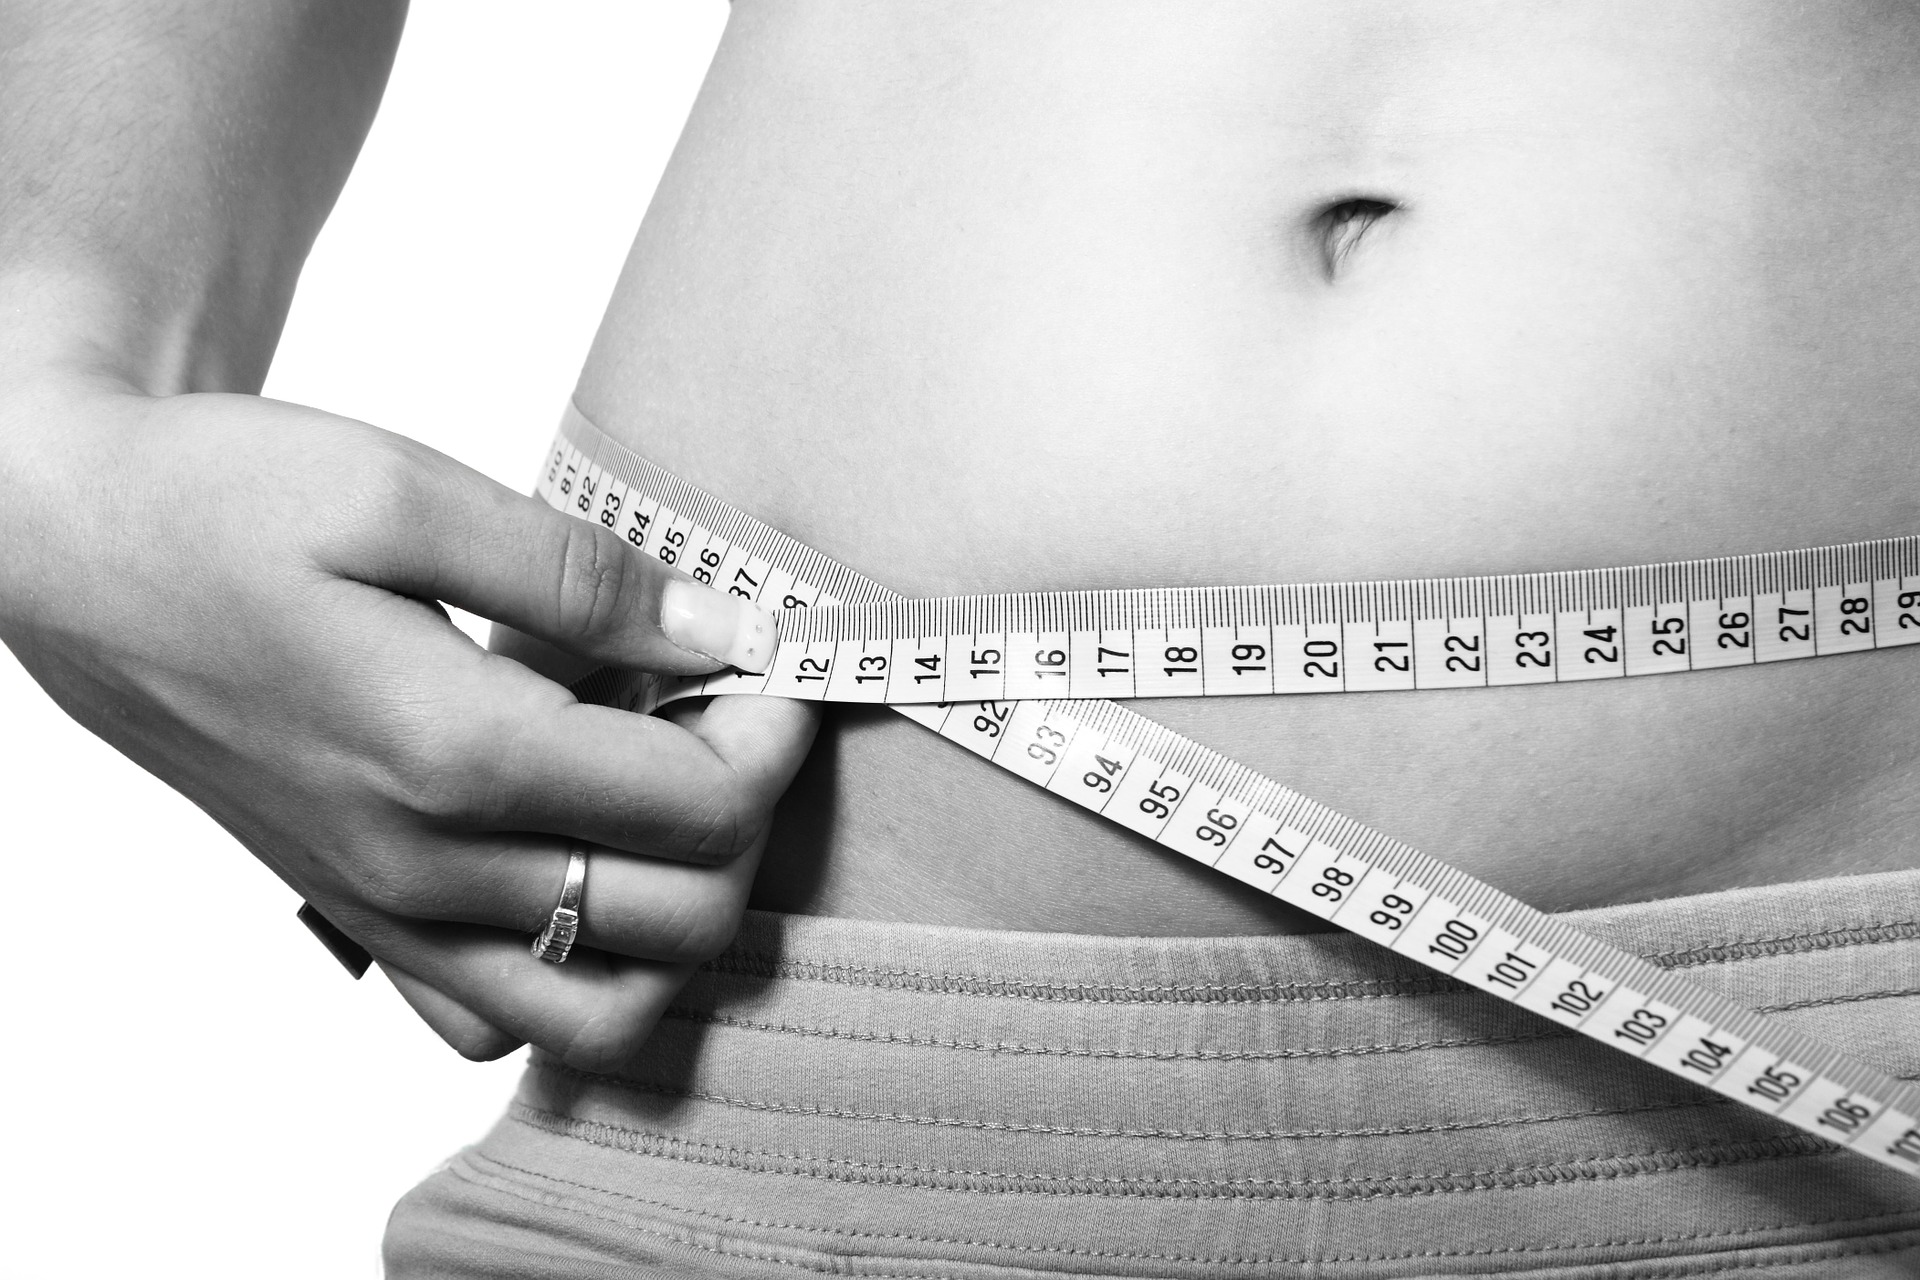 Why measuring BMI and Height is so important